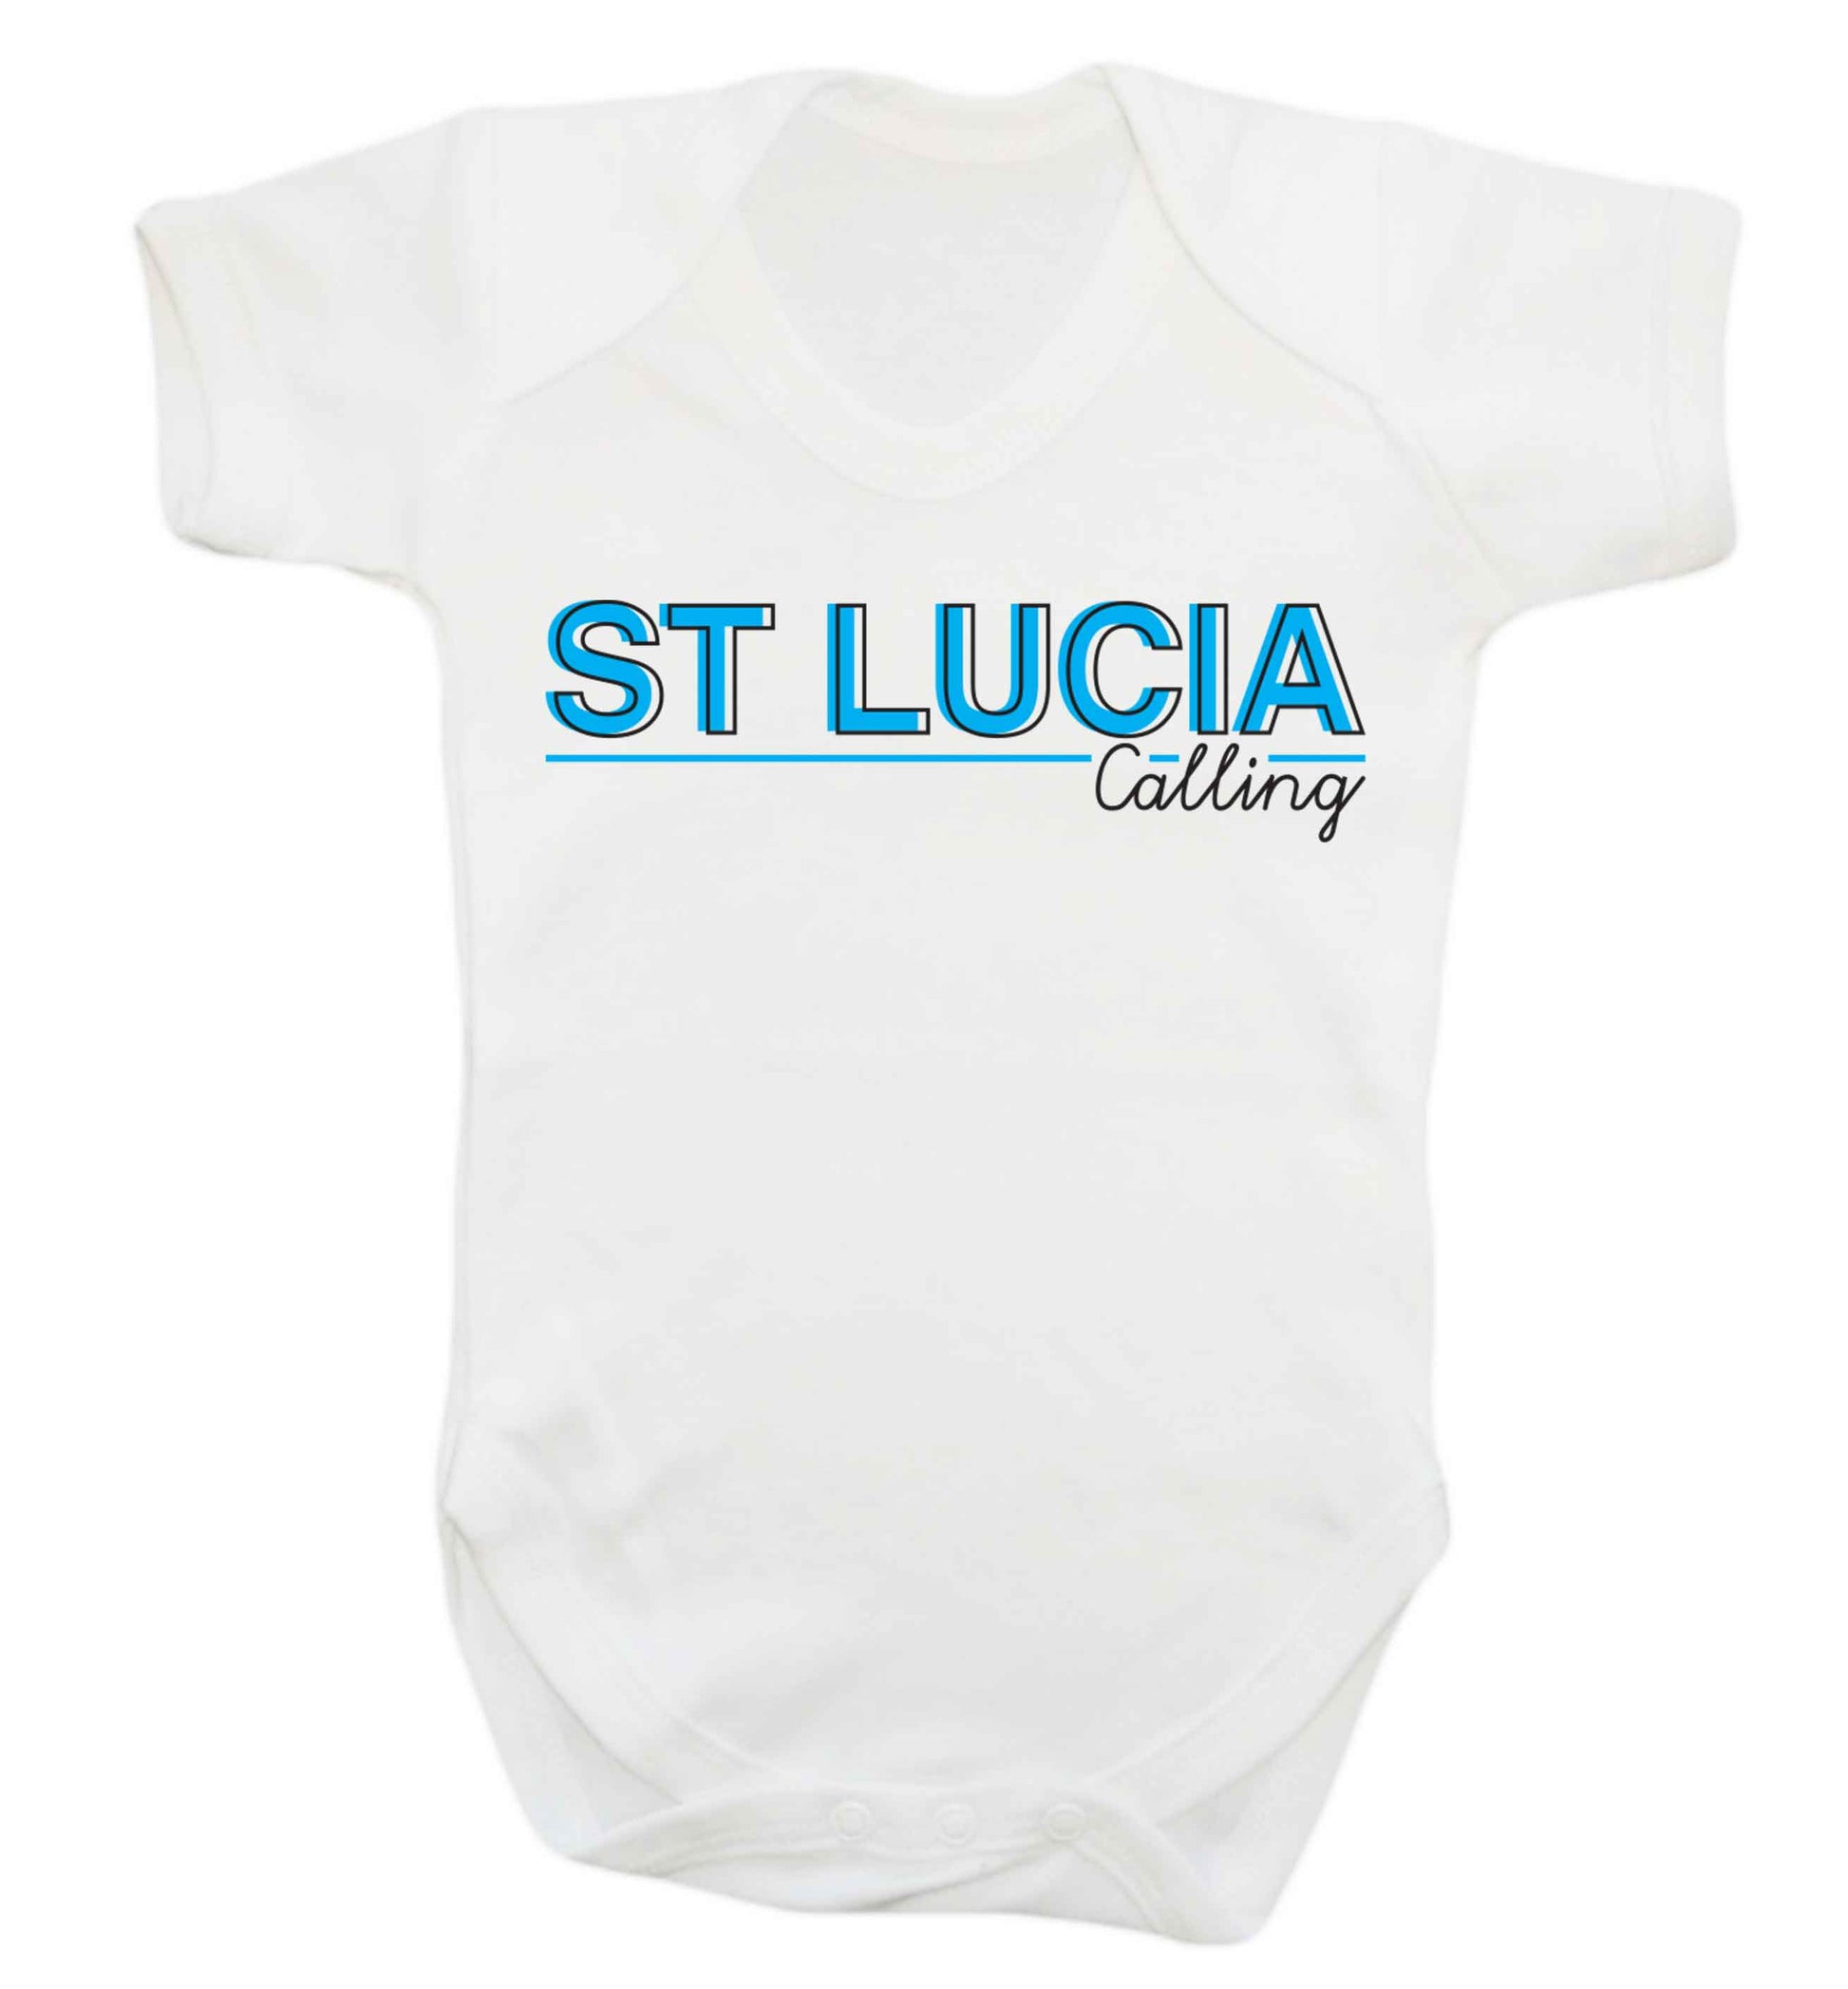 St Lucia calling Baby Vest white 18-24 months